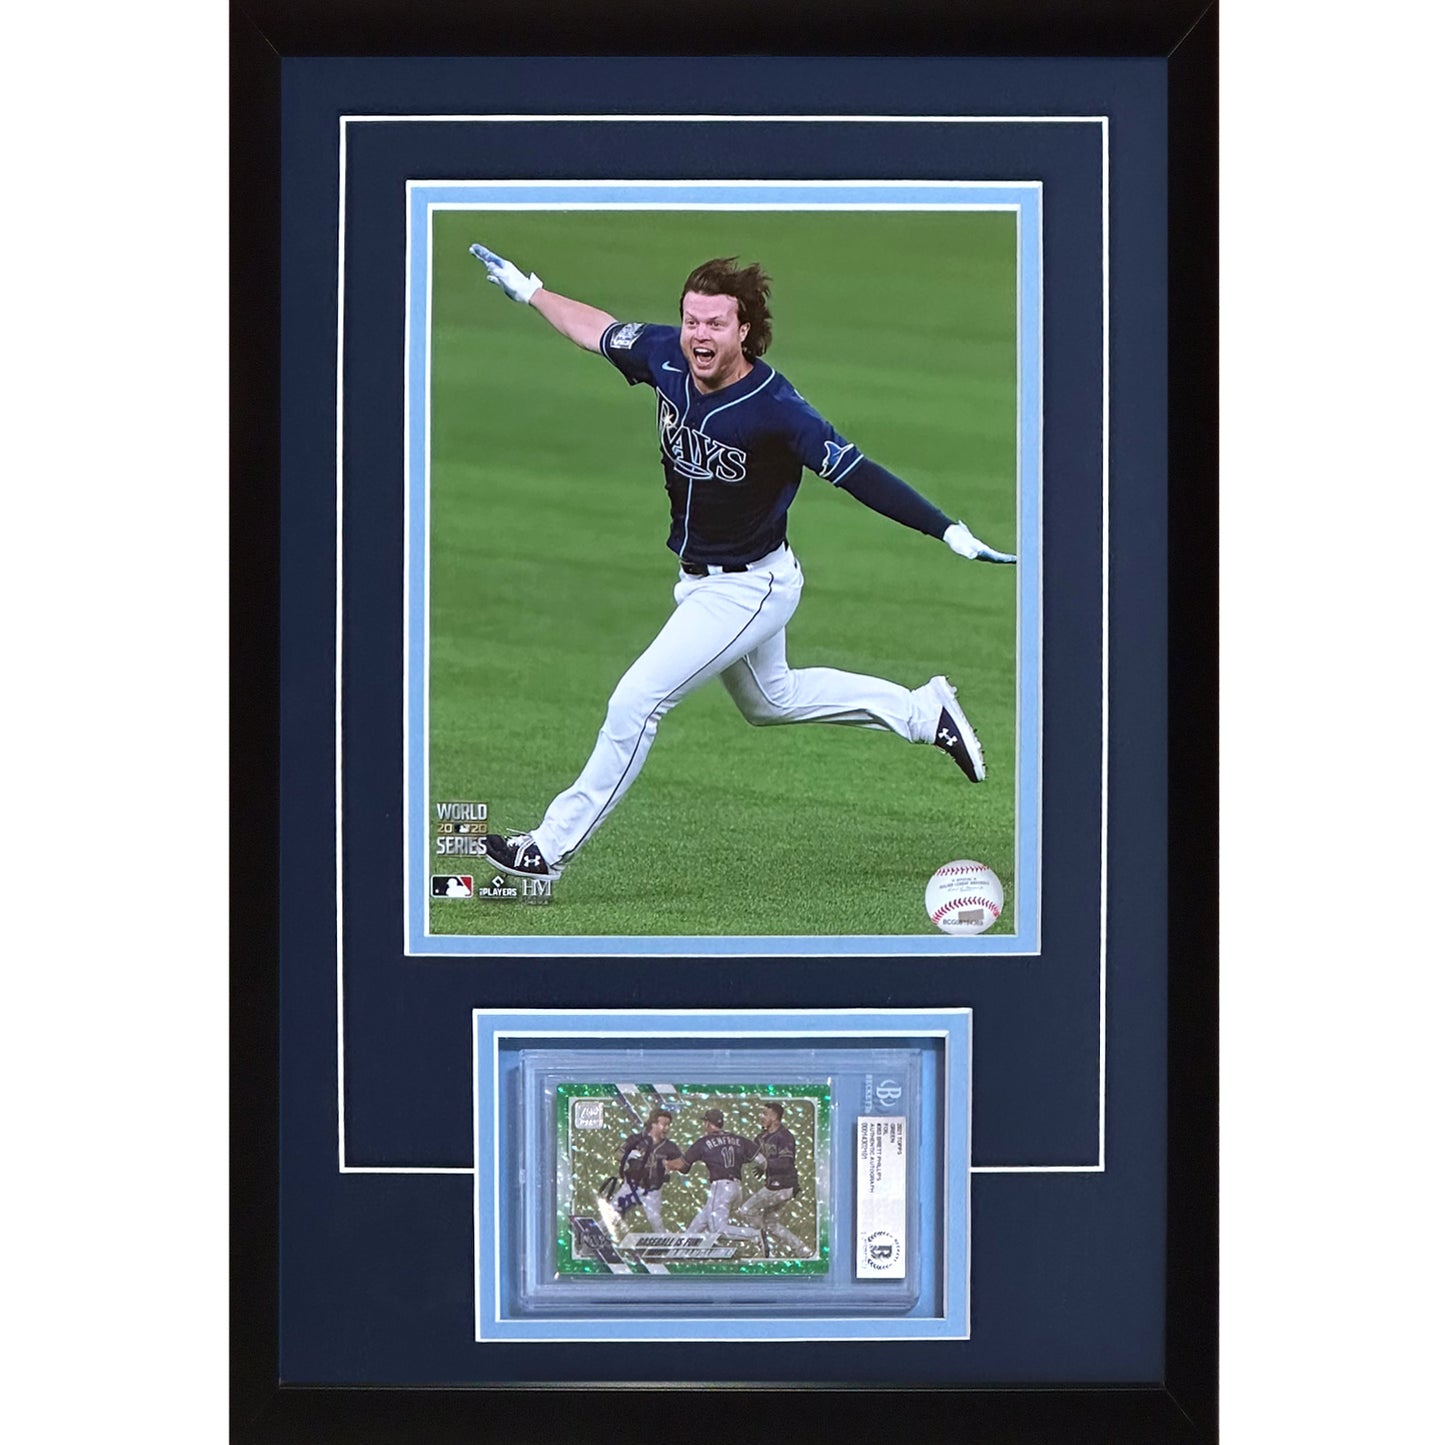 Brett Phillips Autographed Tampa Bay Rays (World Series Airplane) Card Deluxe Framed with 8x10 Photo